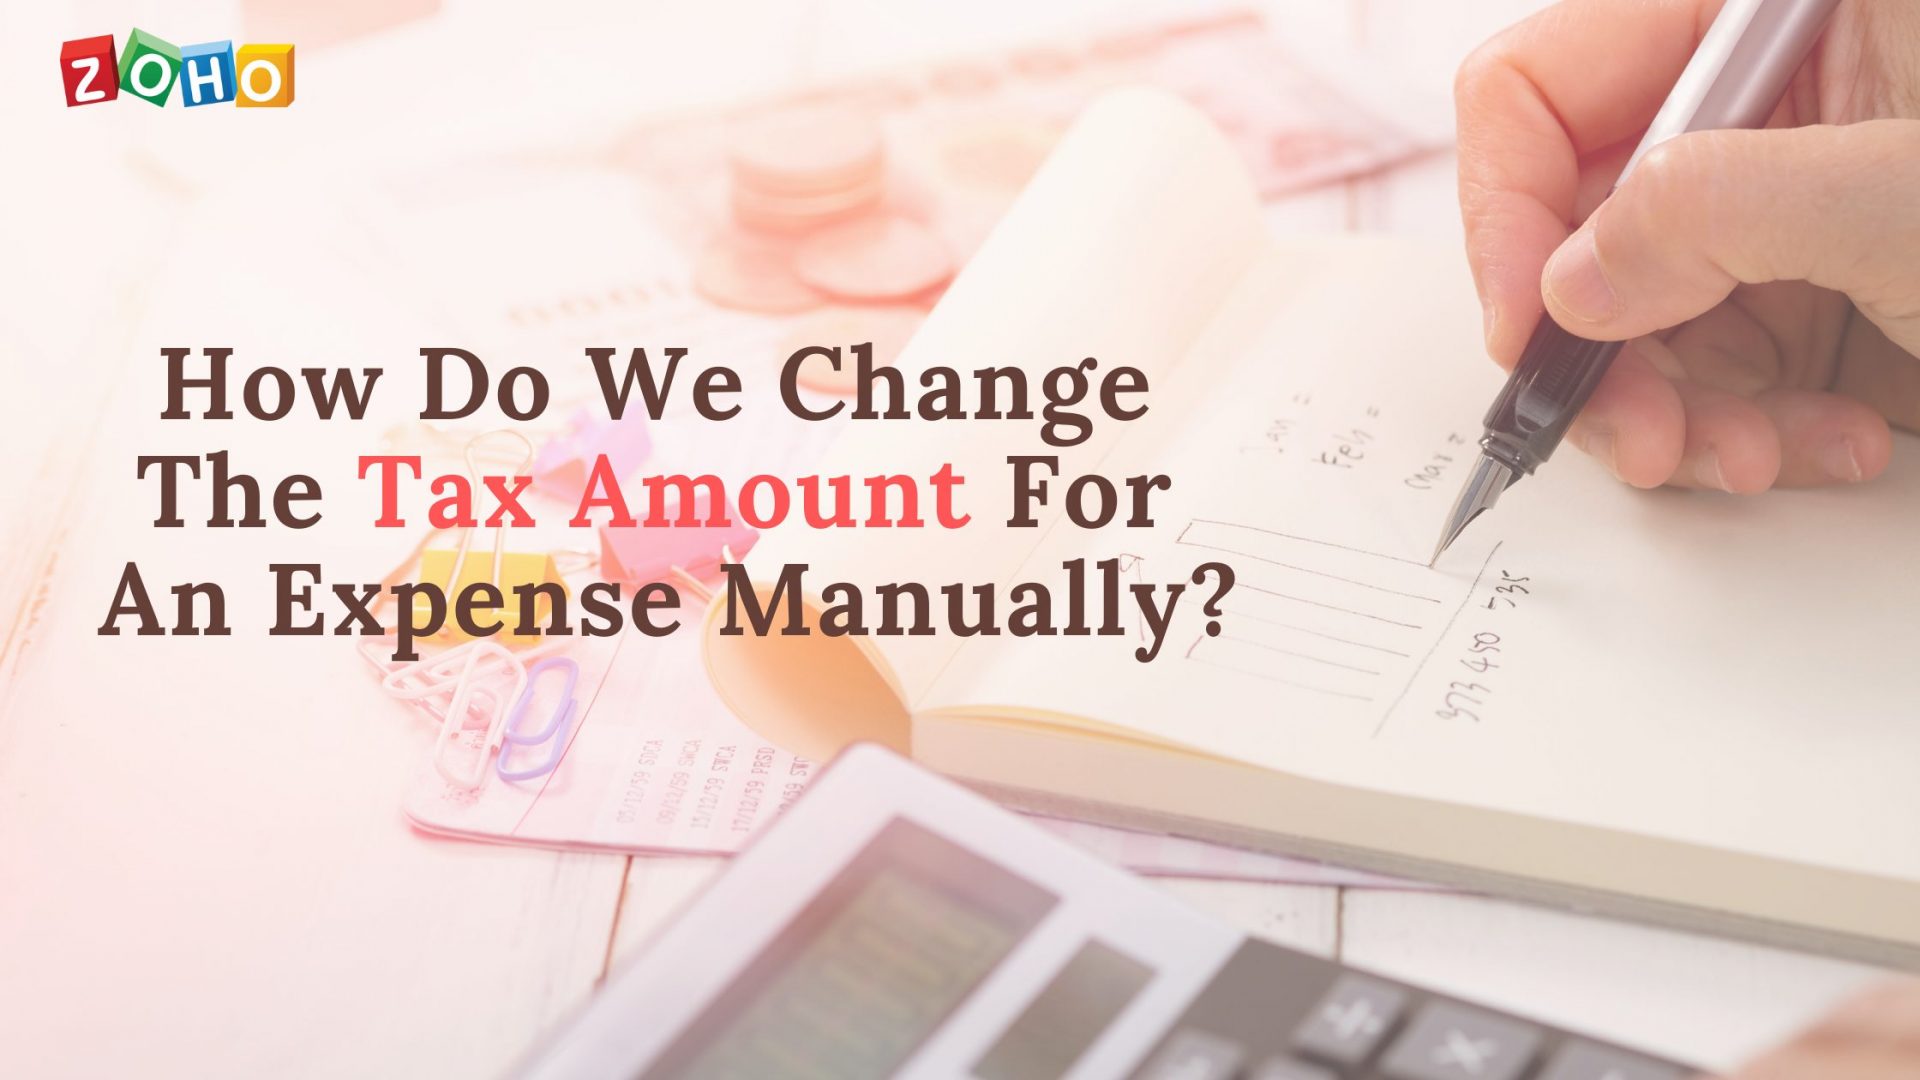 How do we change the tax amount for an expense manually